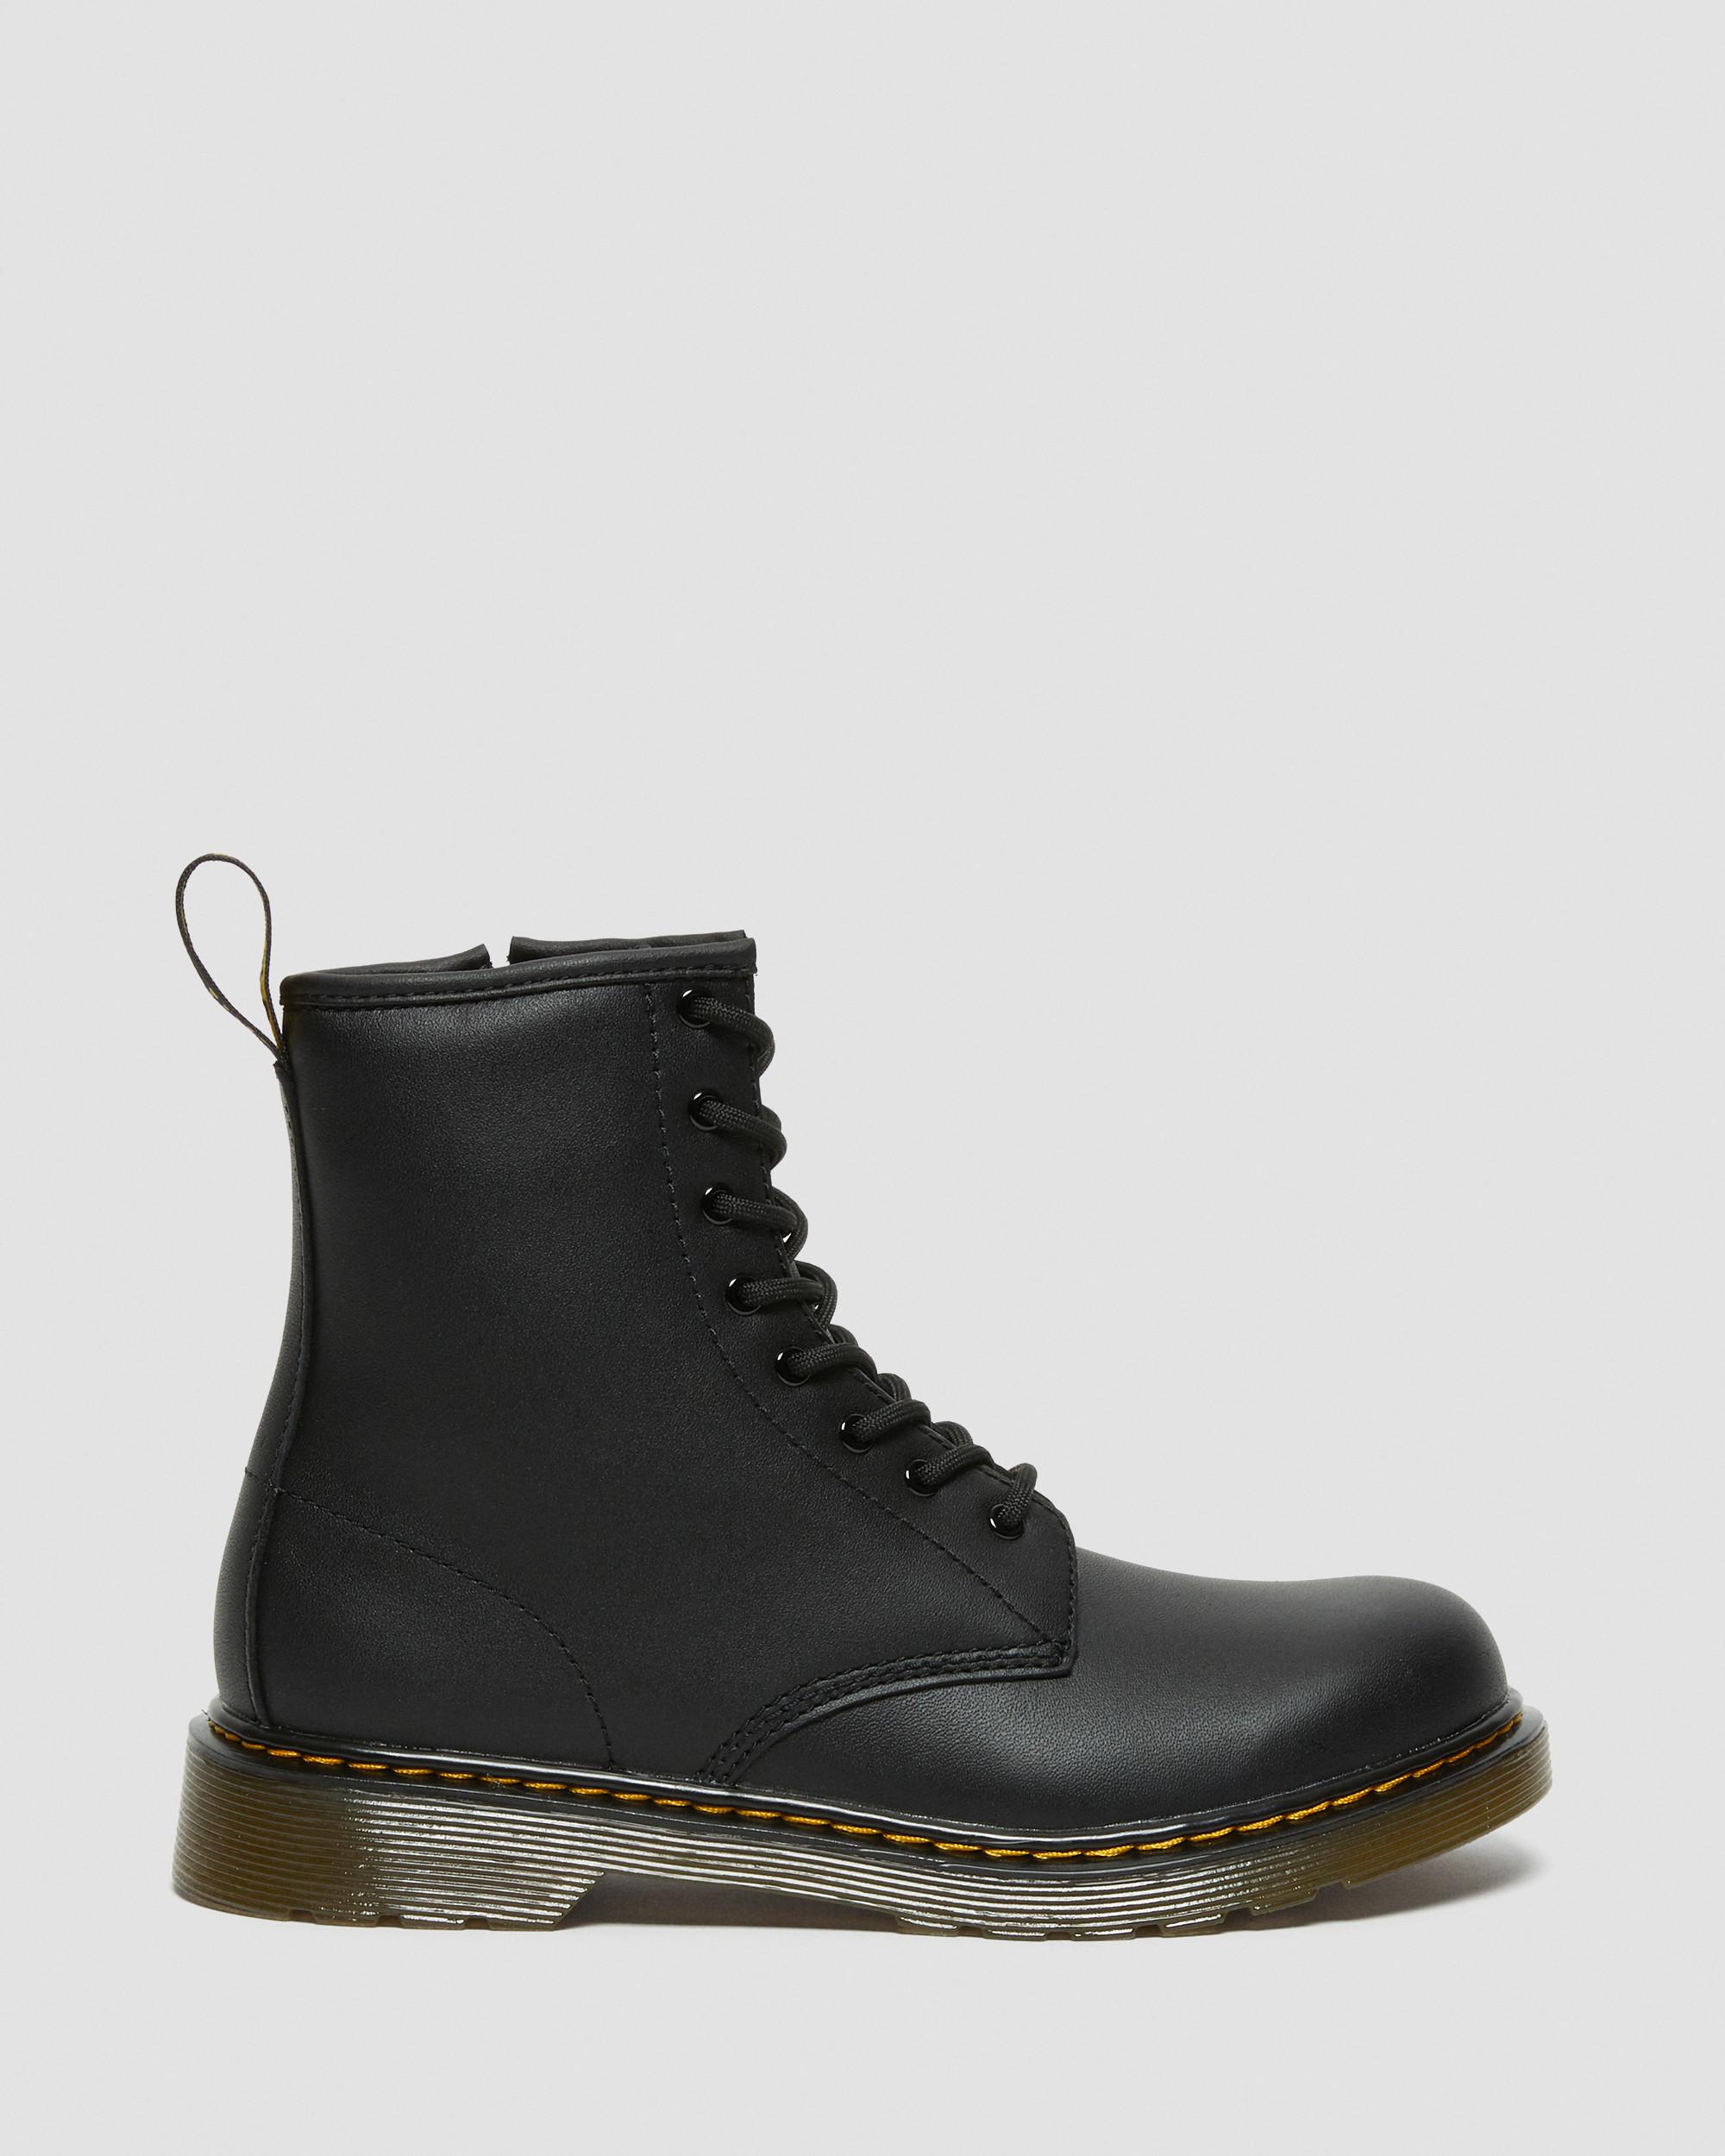 Youth 1460 Black | T in Boots Softy Dr. Martens Lace Up Leather